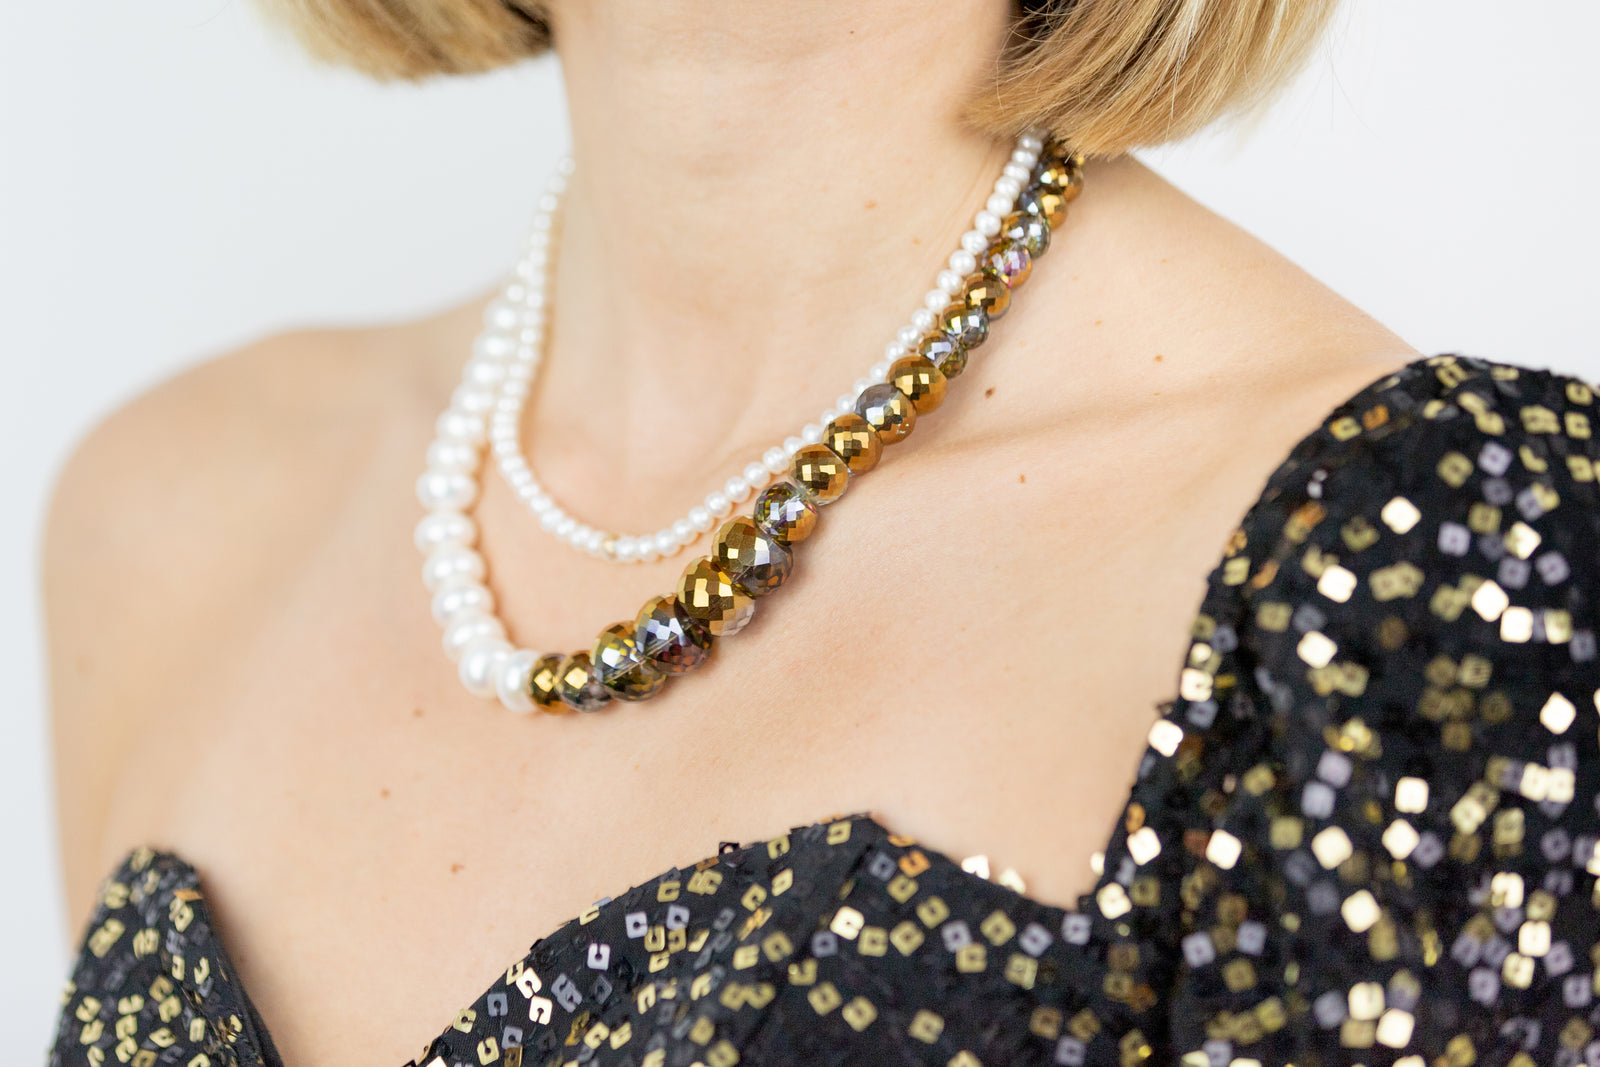 Why pearls make the perfect gift?